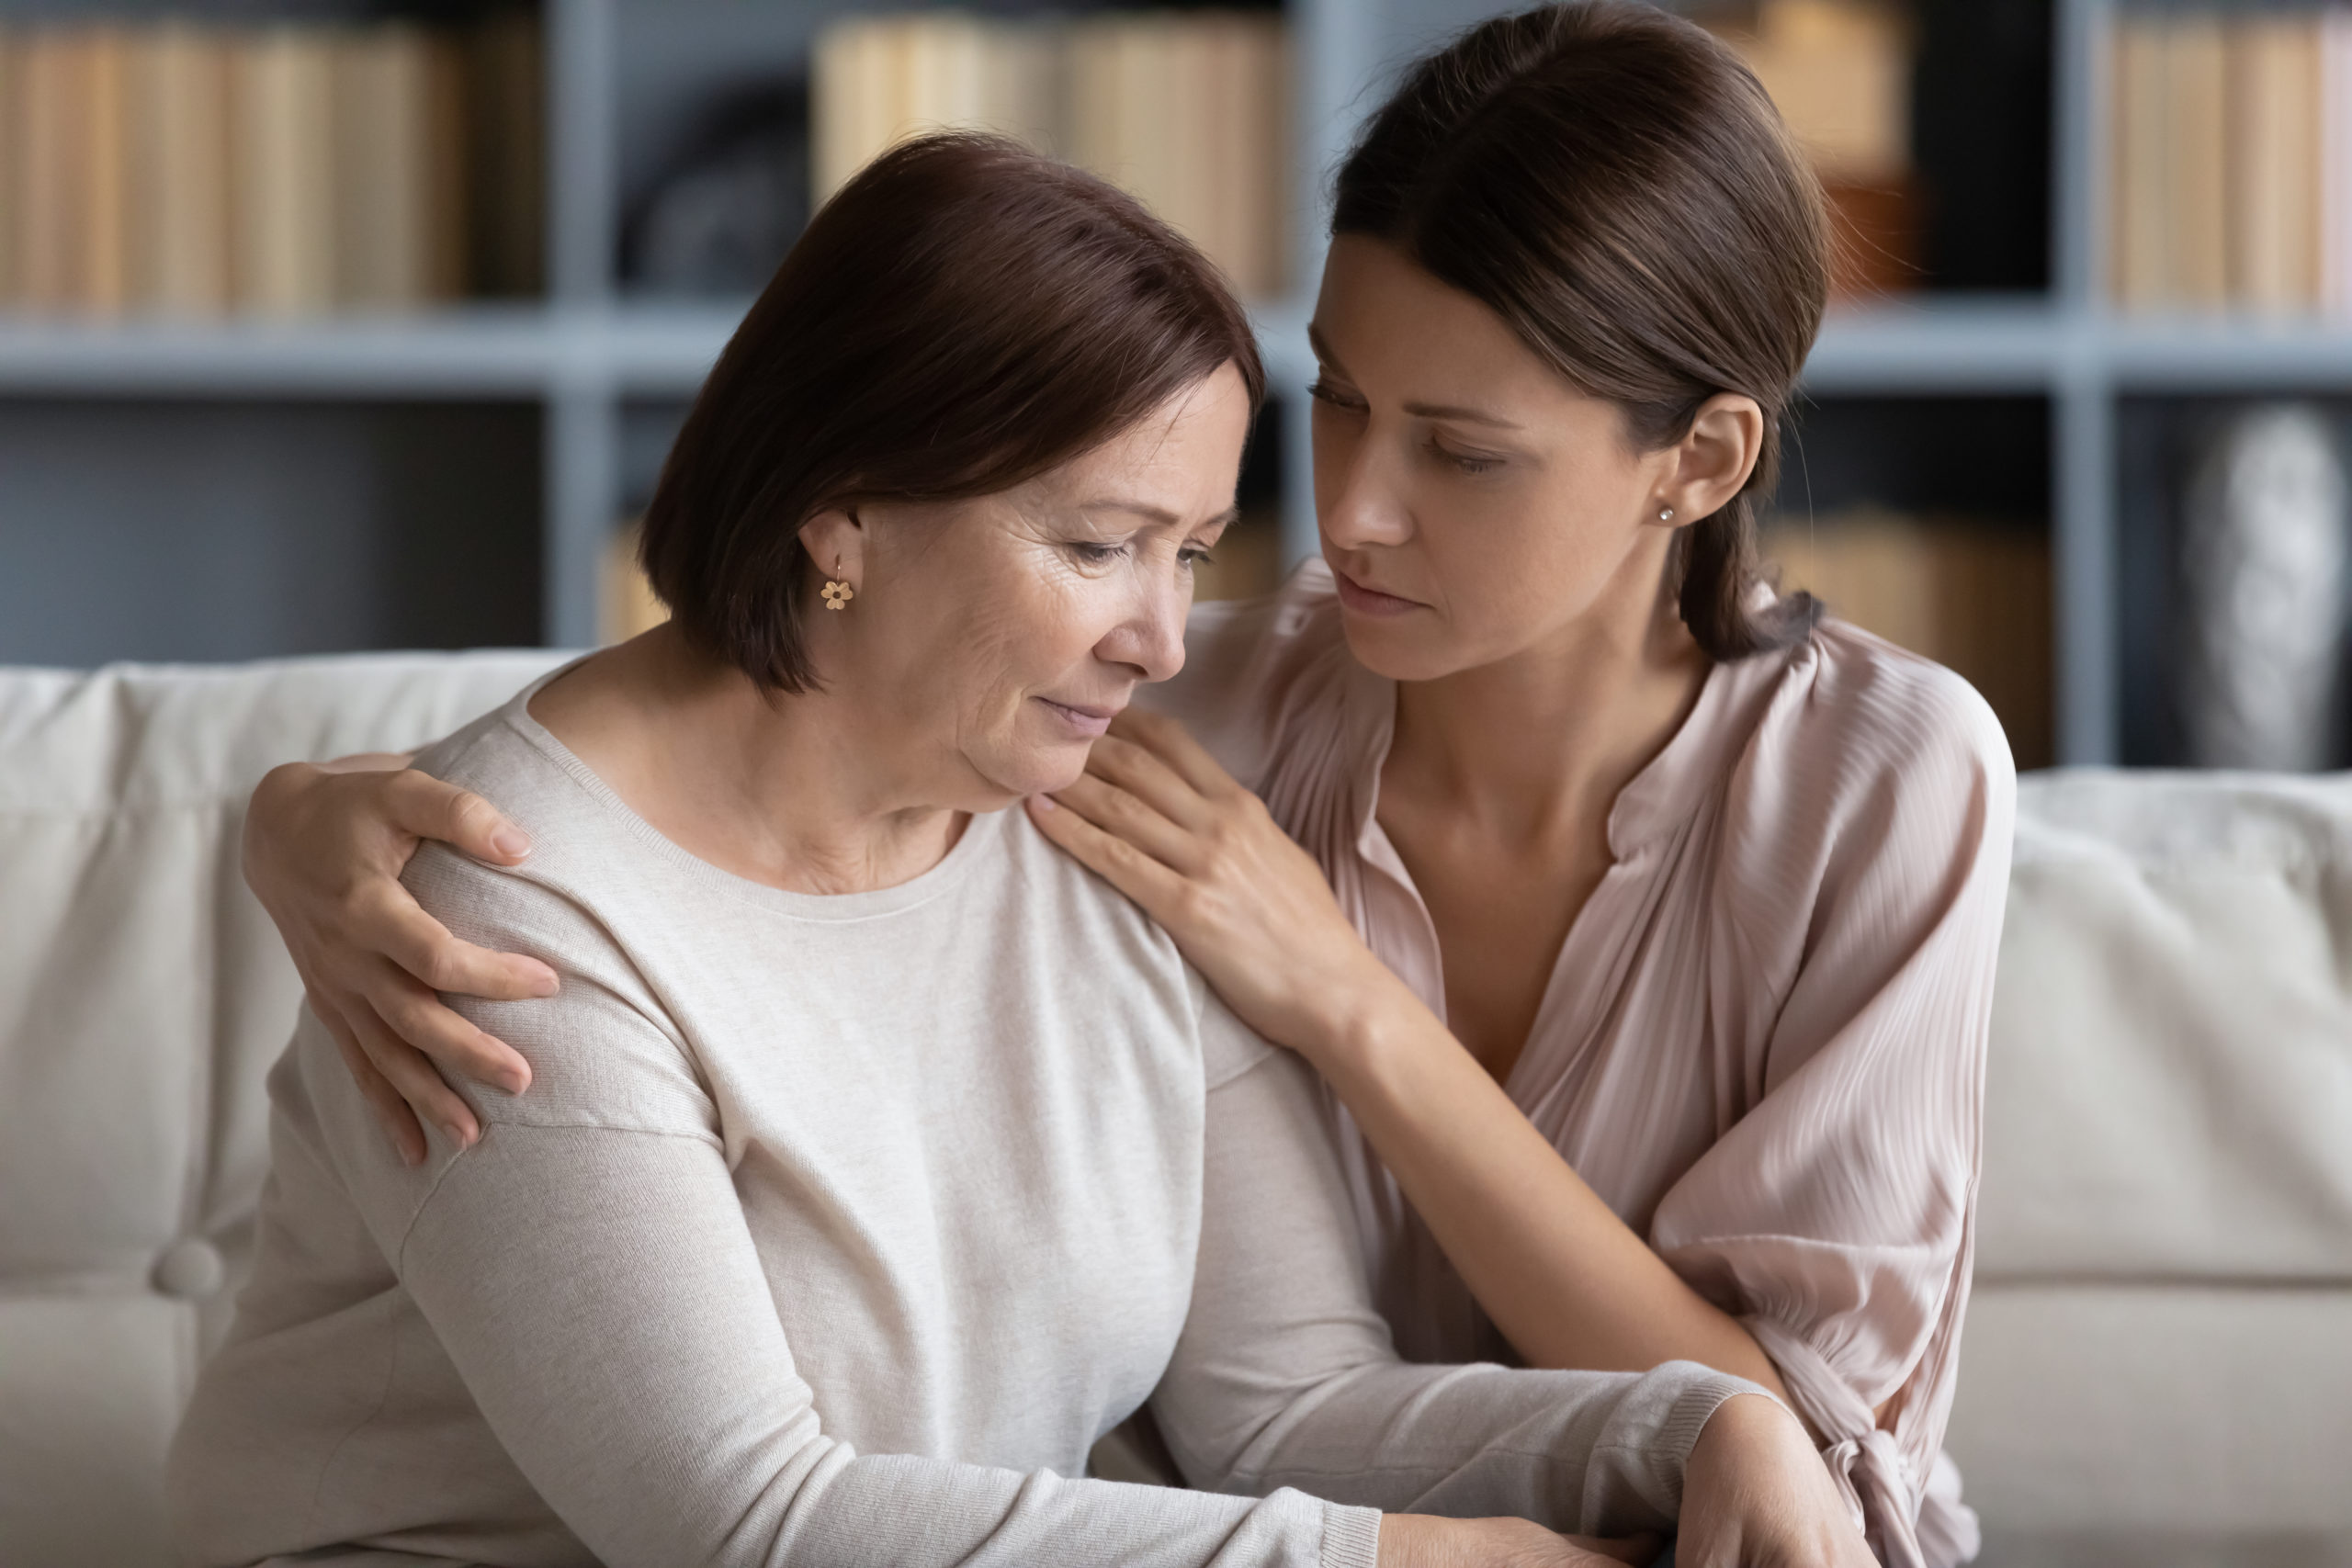 Young compassionate woman embracing shoulder of unhappy stressed middle aged mommy, comforting her at home. Kind grownup daughter supporting caring of older mature mother, sitting together on couch.